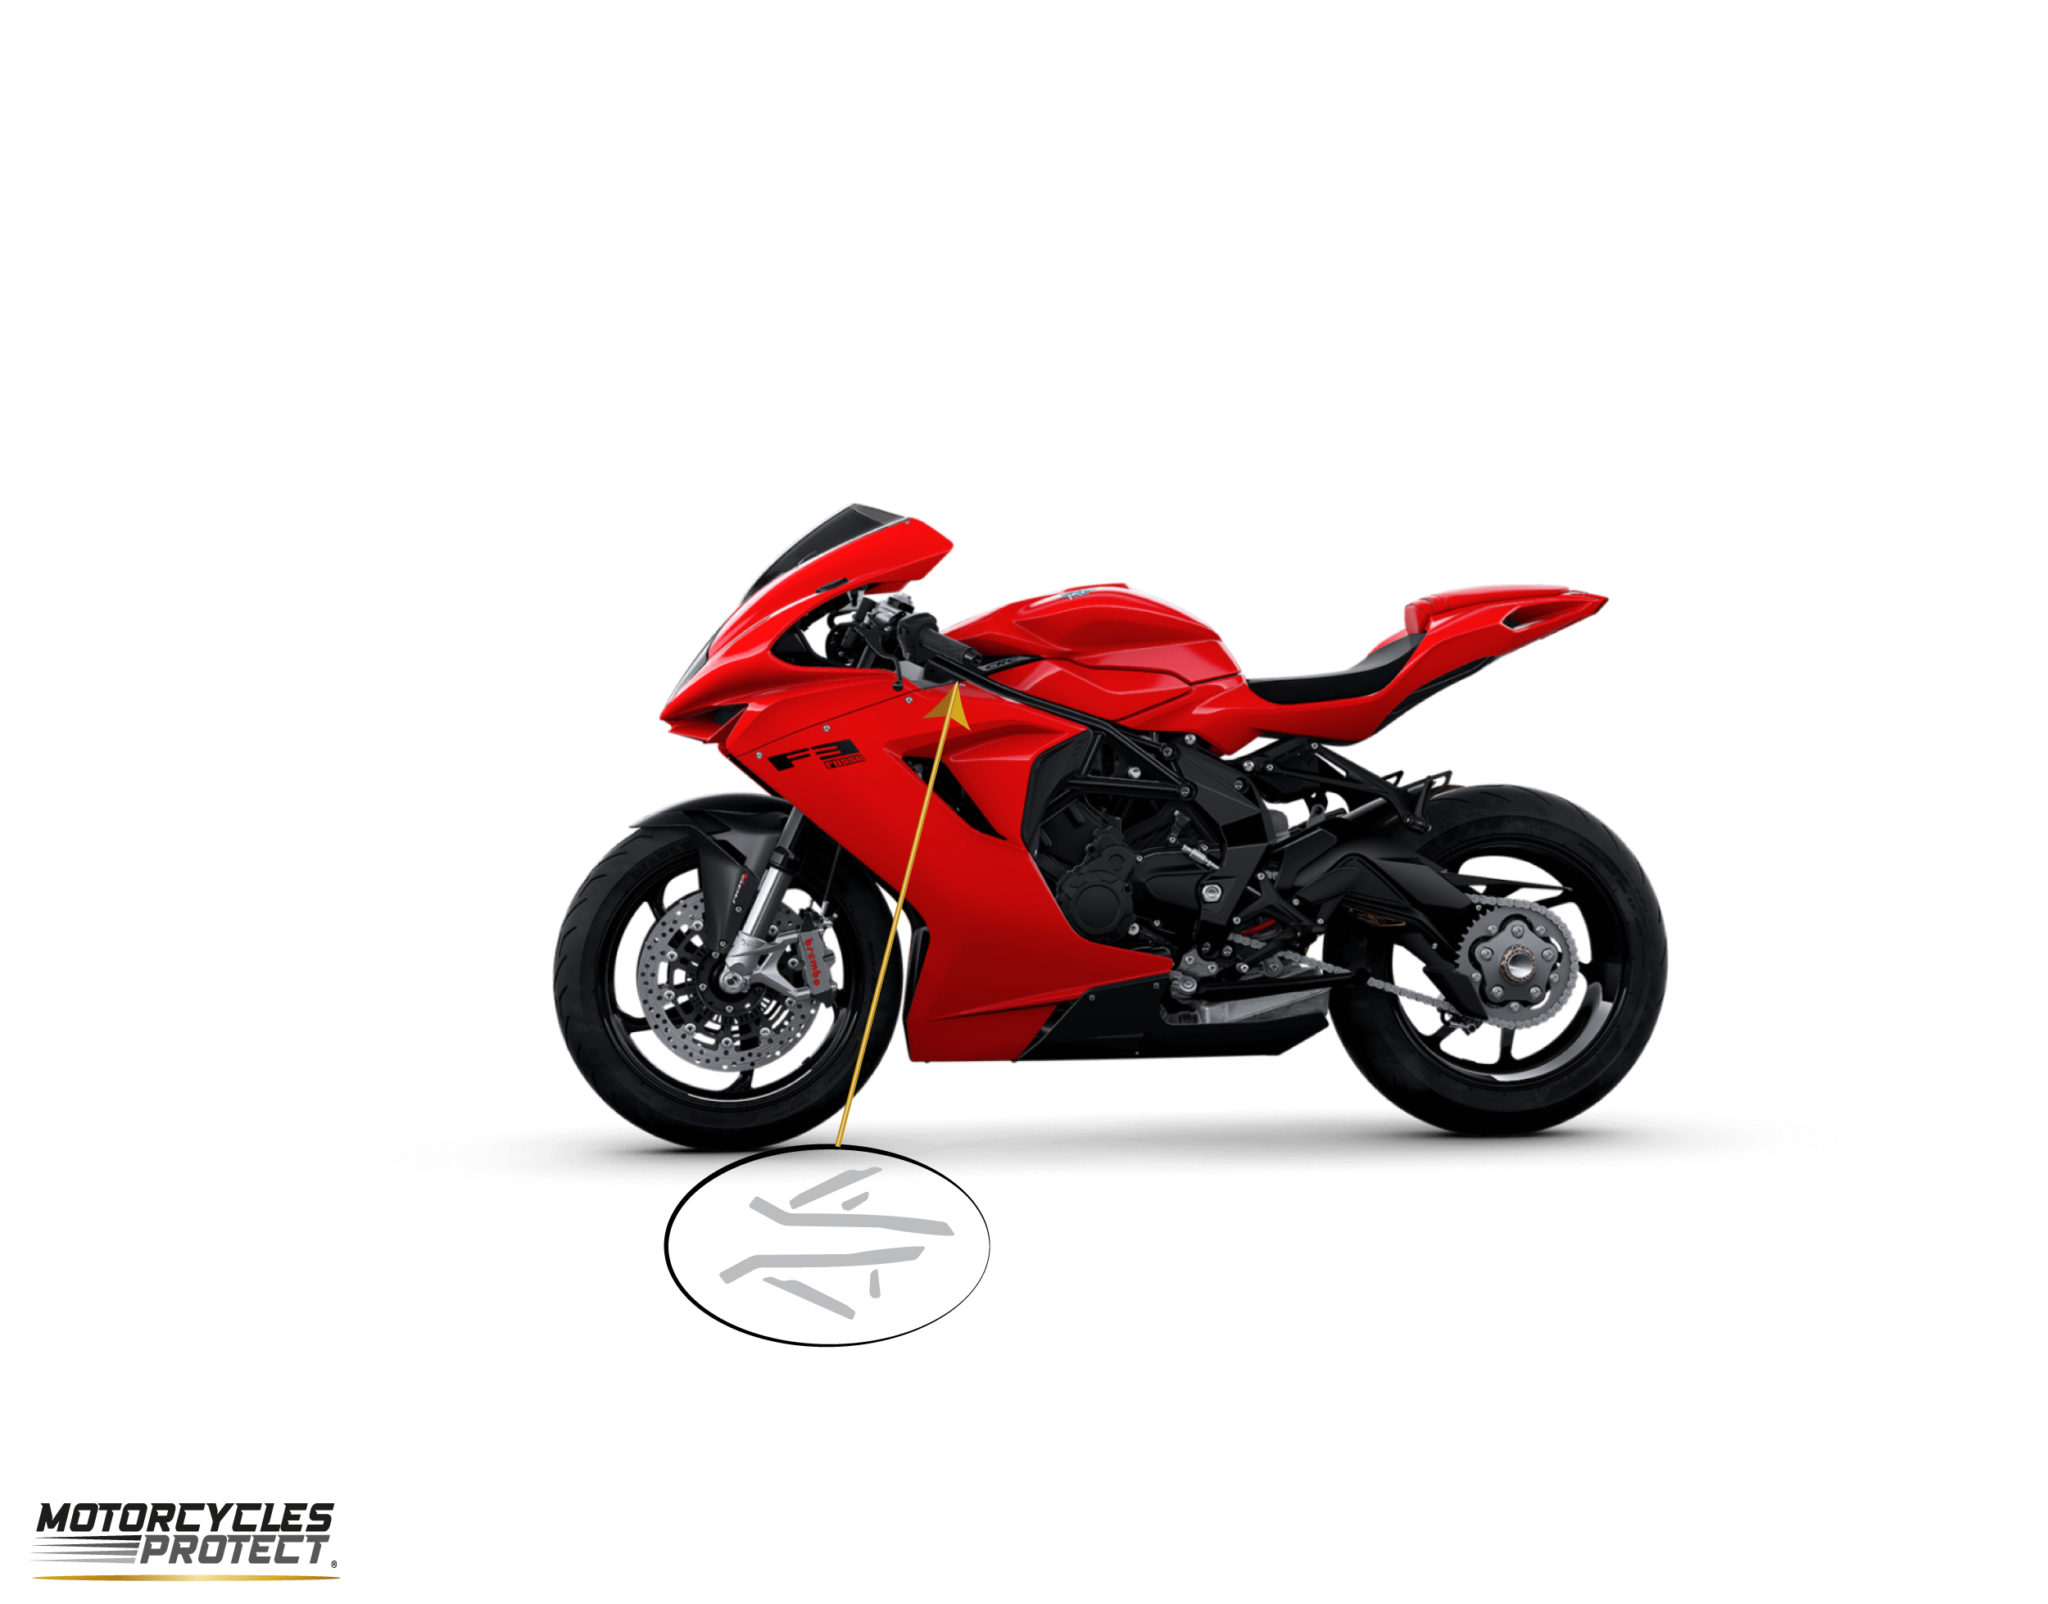 Motorcycles Protect - Premium Paint Protection Film (PPF)